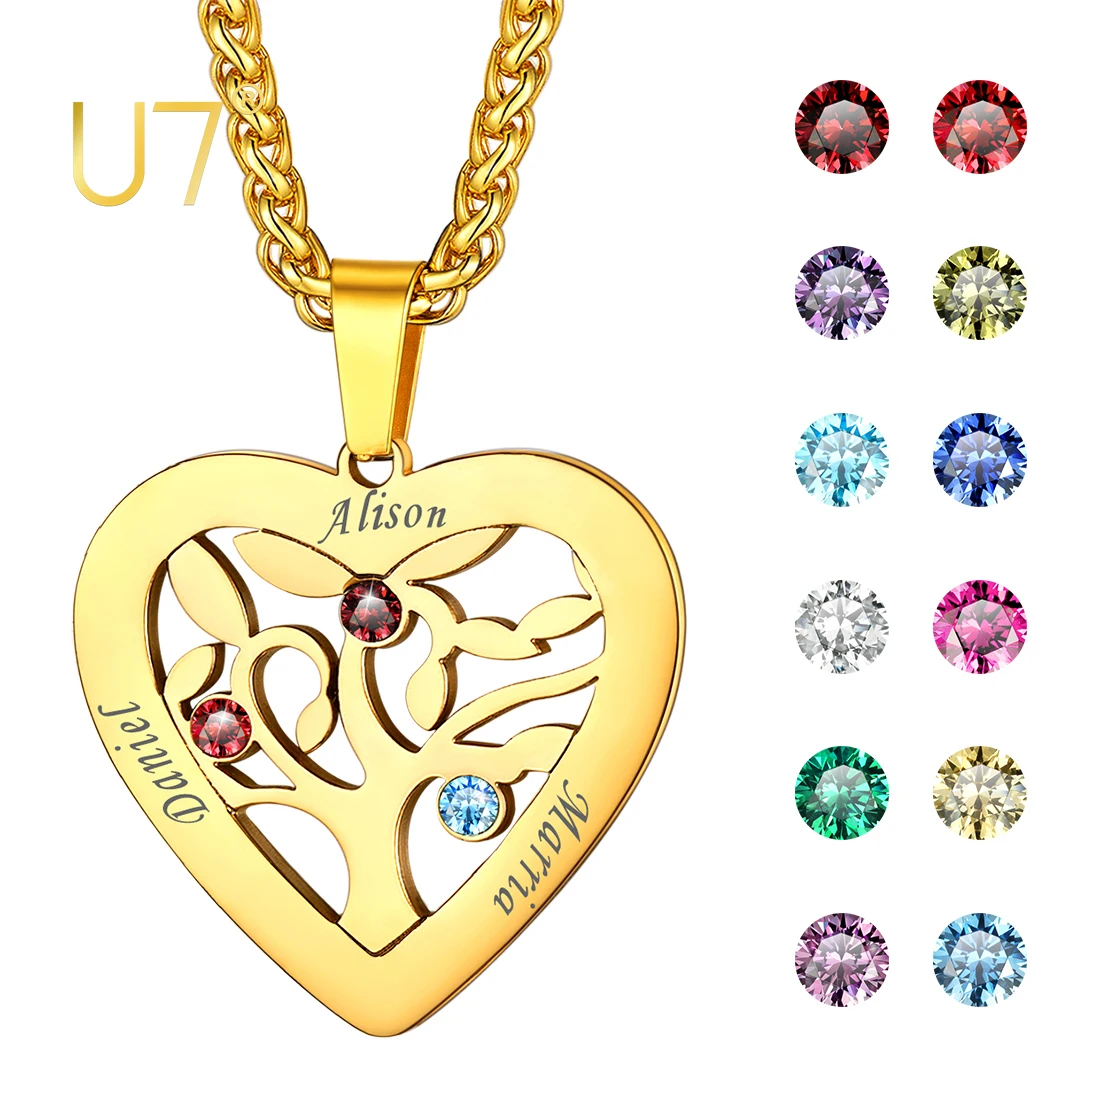 U7 Heart Pendant Necklace Personalized Engraved Stainless Steel Jewelry Friend Family Names Birthstone Gift for Women Girls friendship quote not sisters by blood but sisters by heart spiral notebook bff note book notepad journal to best friend gift